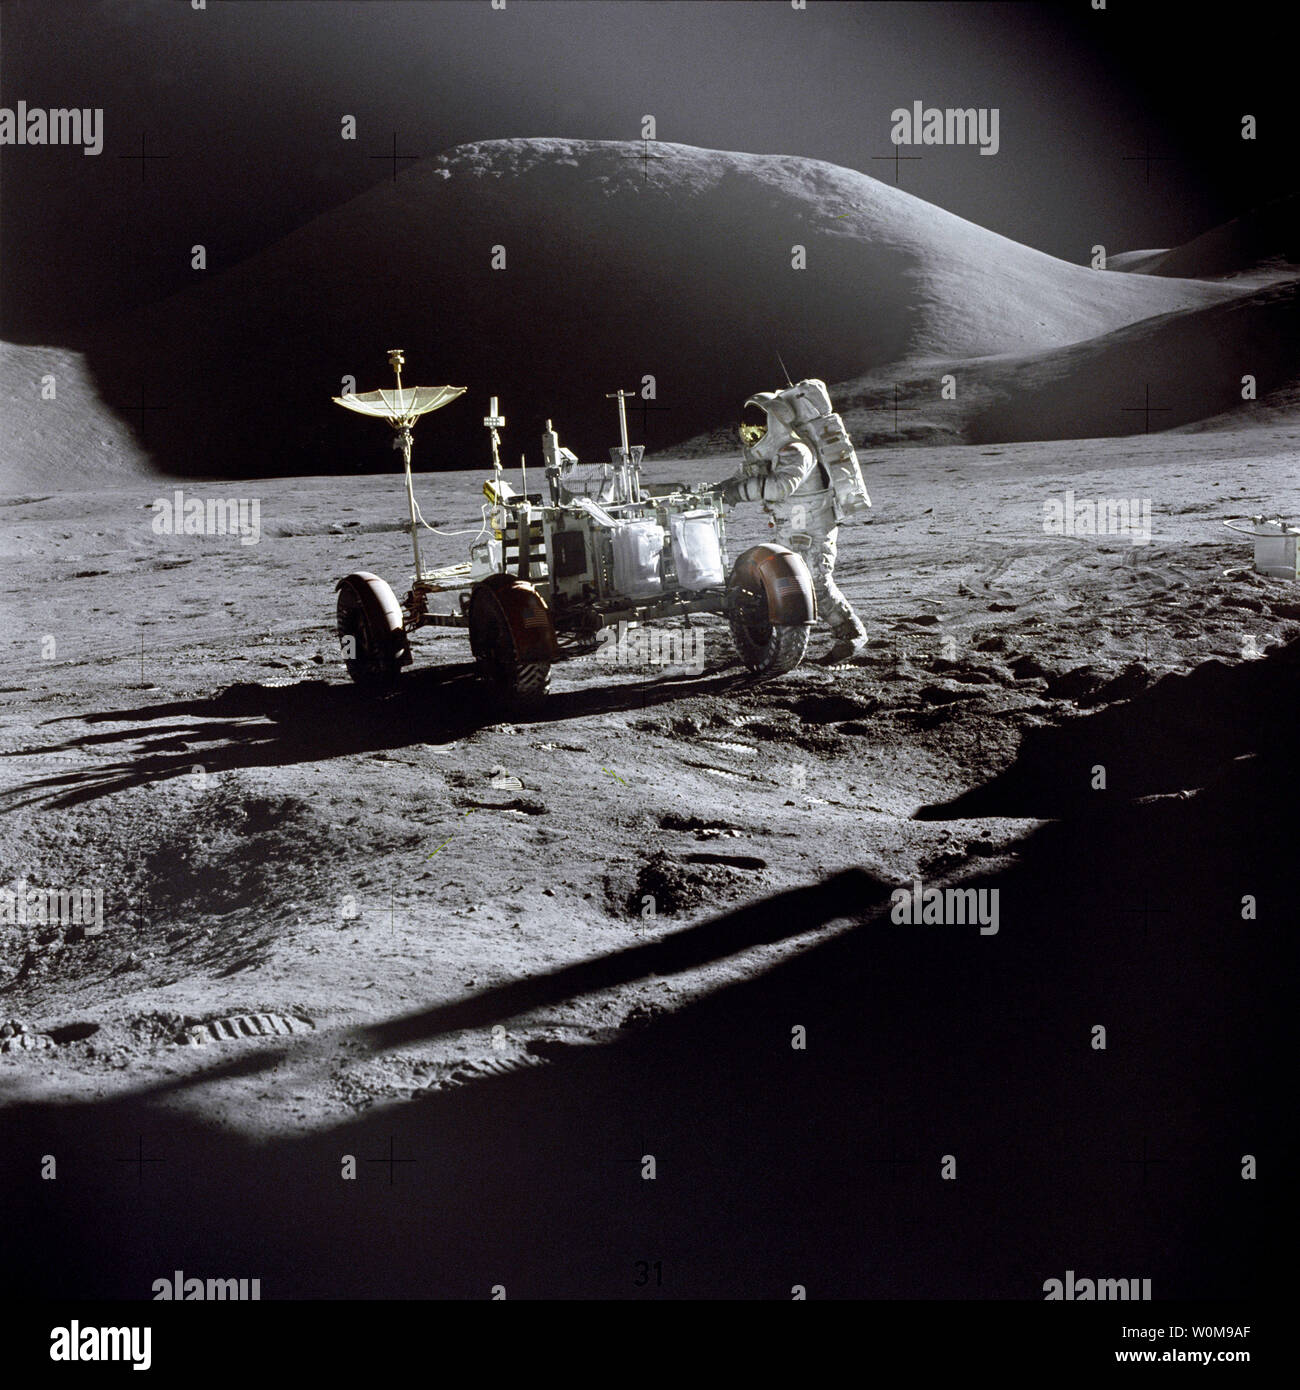 Lunar module pilot James Irwin works at the Lunar Roving Vehicle during the first Apollo 15 lunar surface extravehicular activity at the Hadley-Apennine landing site on July 31, 1971. The shadow of the Lunar Module 'Falcon' is in the foreground. This view is looking northeast, with Mount Hadley in the background. Apollo 15 launched 35 years ago today on July 26, 1971, at 9:34 a.m. EDT from the Kennedy Space Center. Alfred Worden was the mission's command module pilot. (UPI Photo/David R. Scott/NASA) Stock Photo